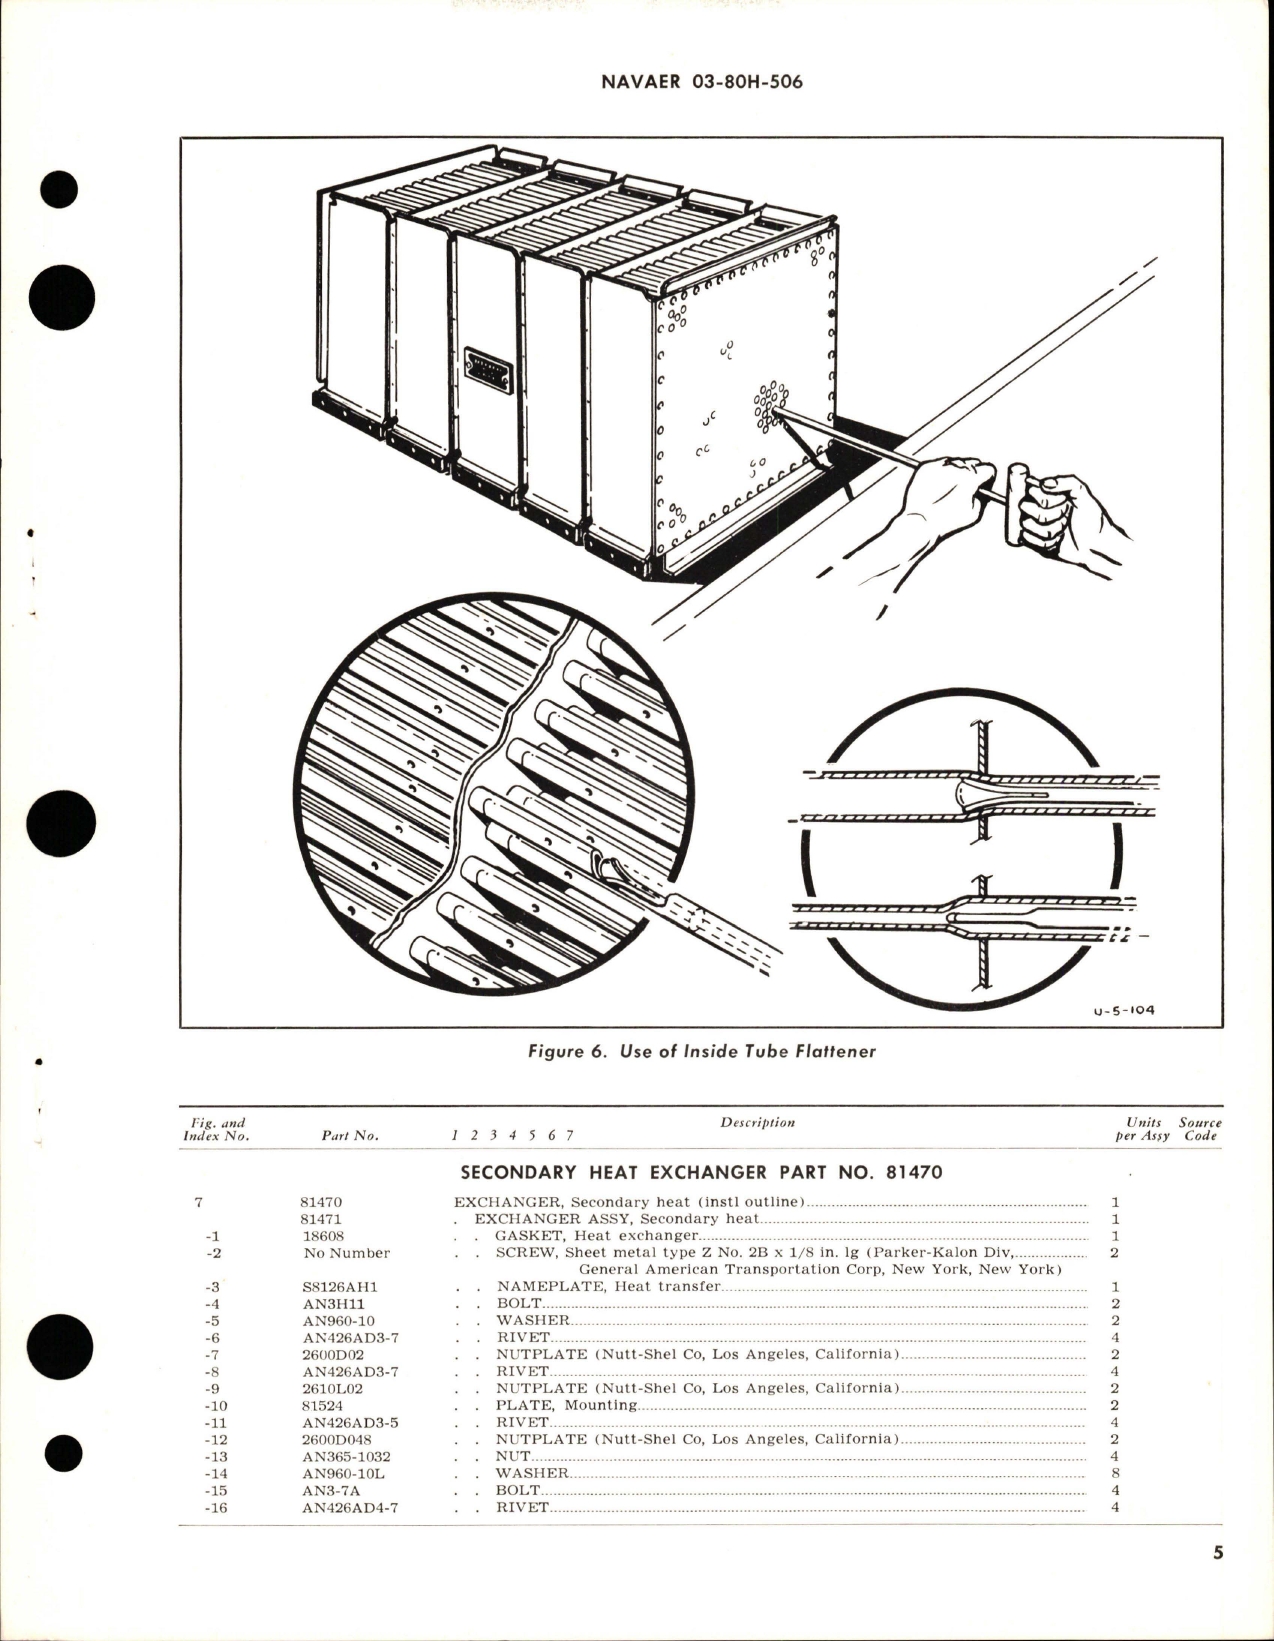 Sample page 5 from AirCorps Library document: Overhaul Instructions with Parts Breakdown for Secondary Heat Exchanger - 81470